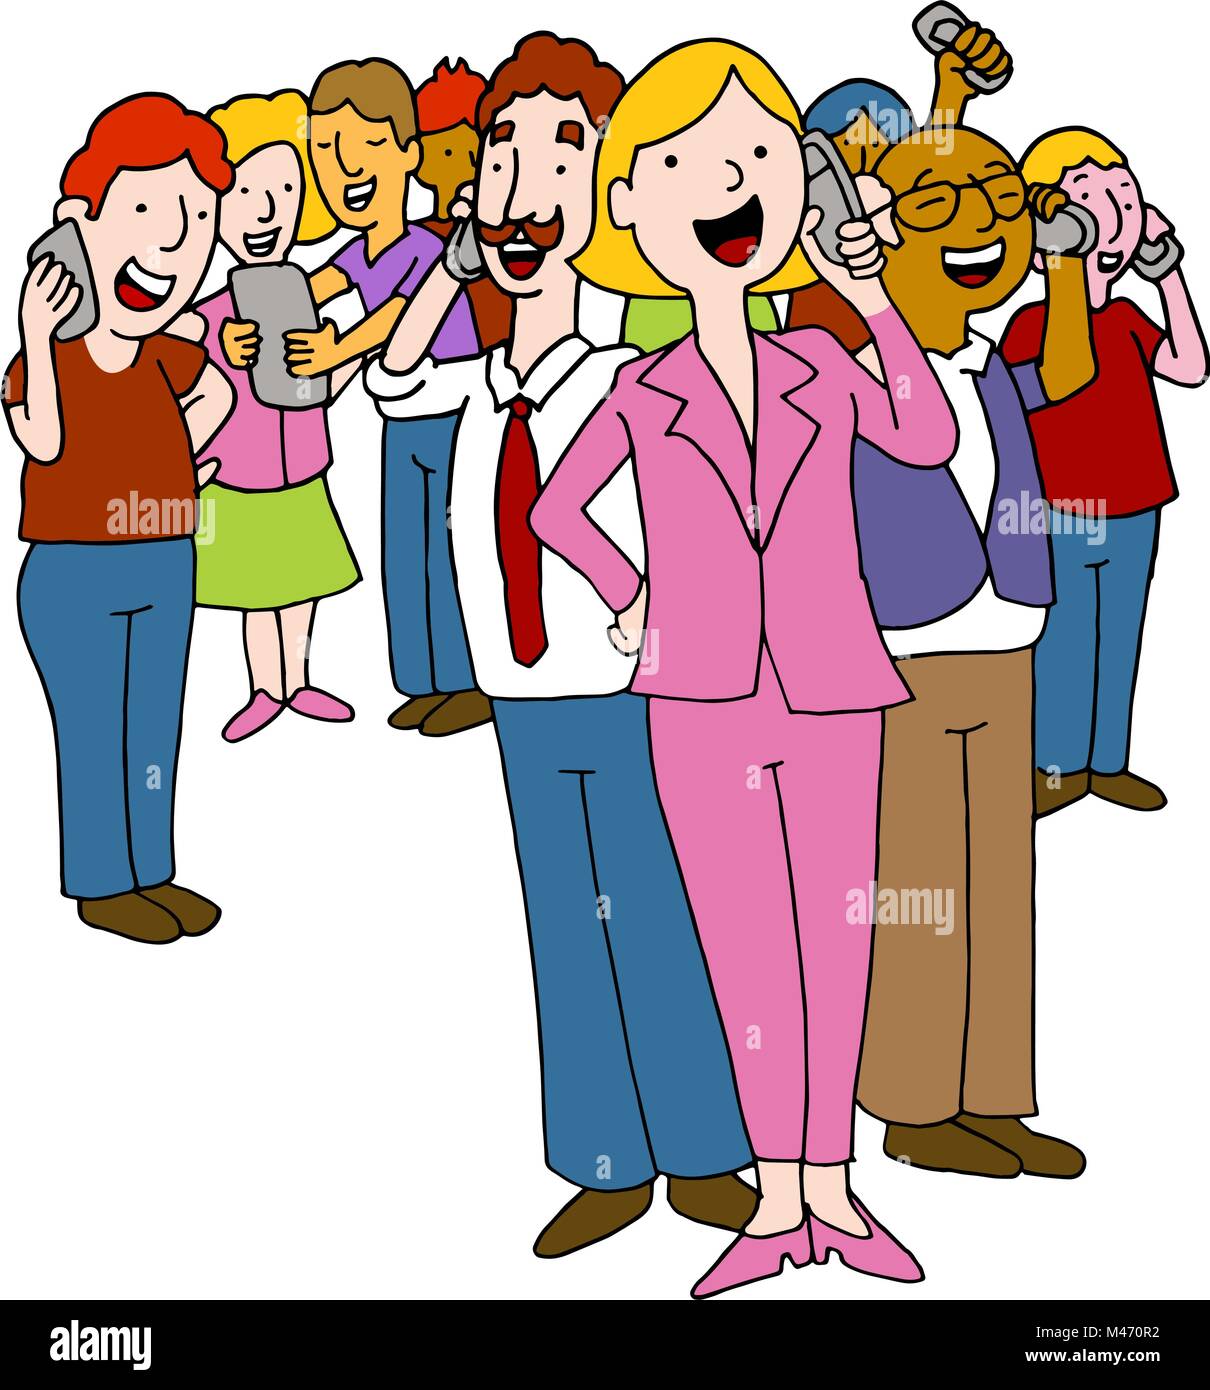 An image of a crowd of people using mobile telephones. Stock Vector